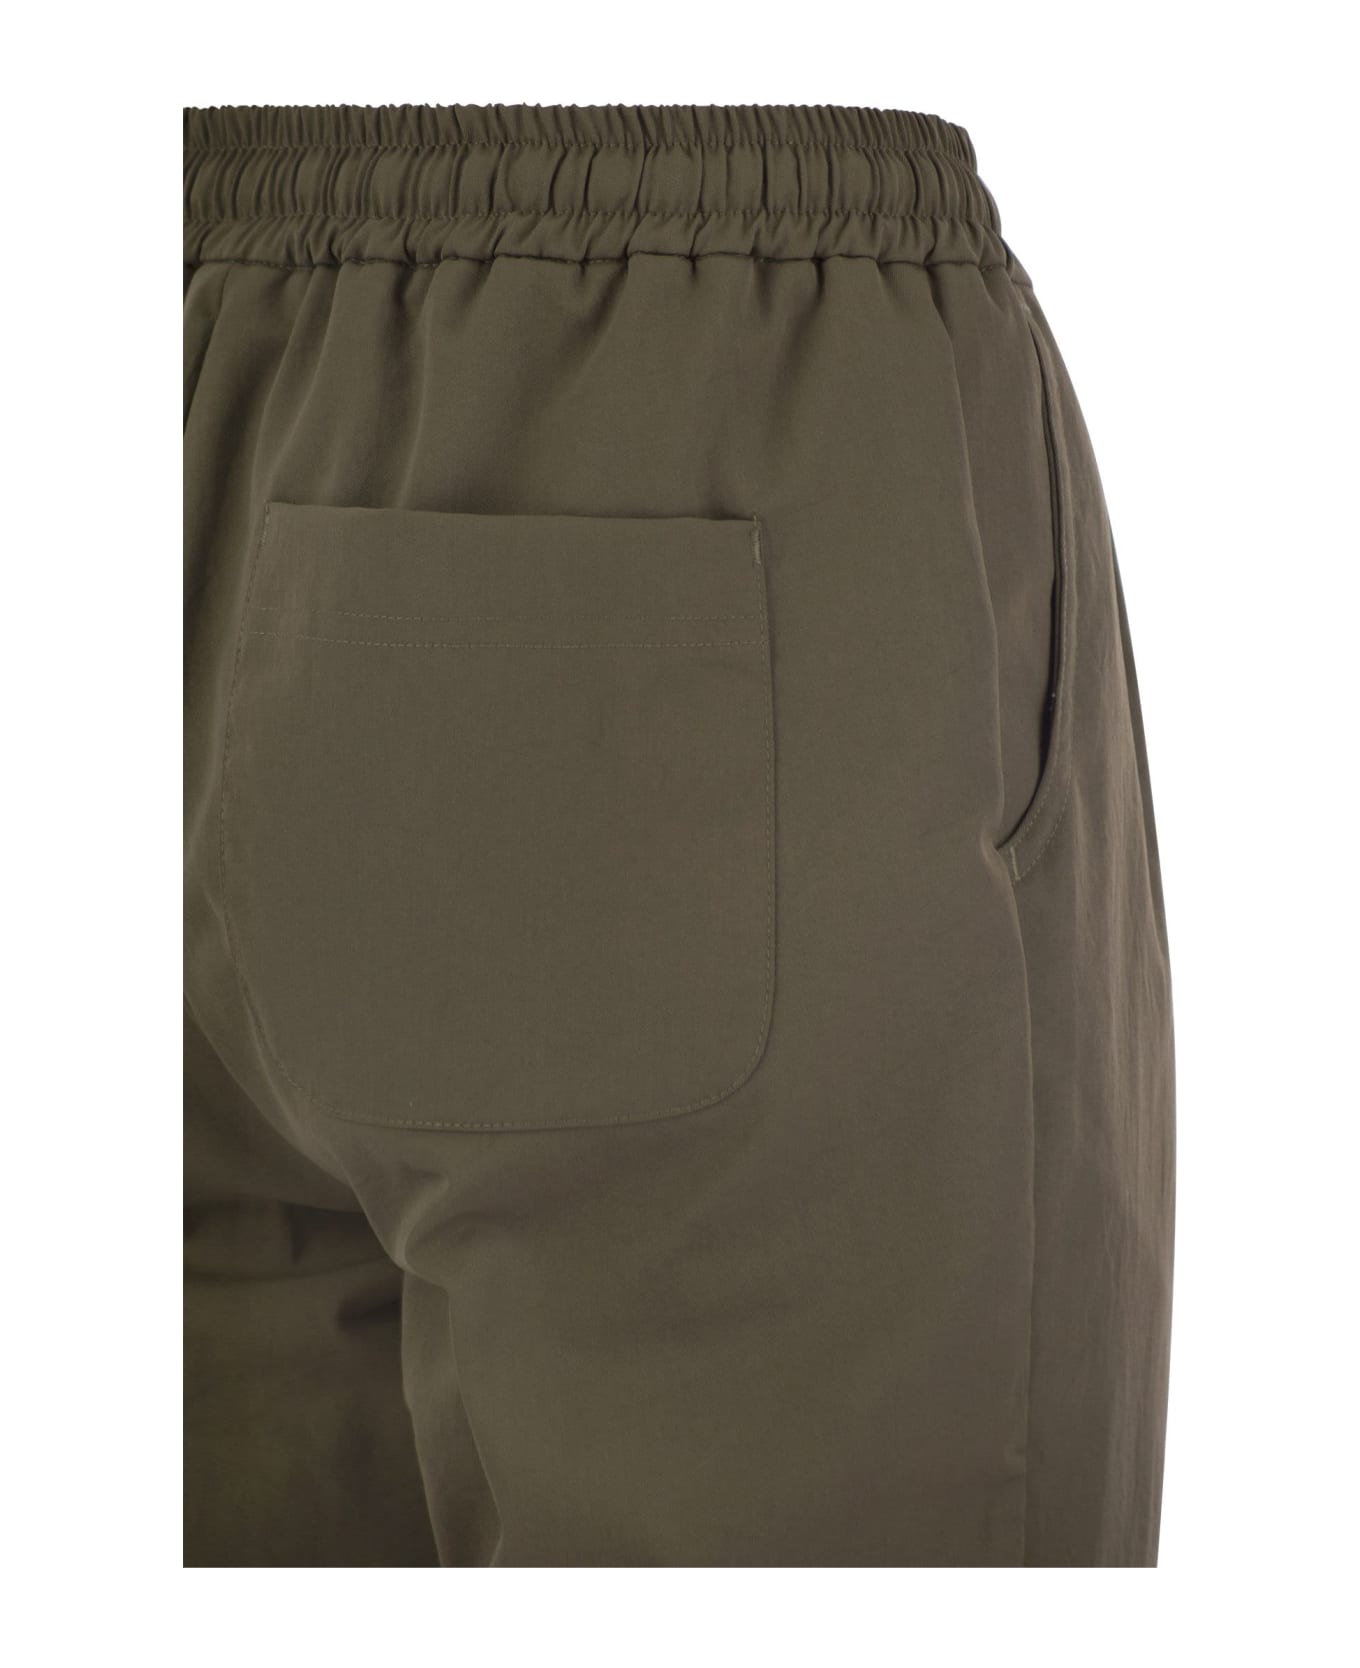 Colmar Classy - Trousers With Darts - Military Green